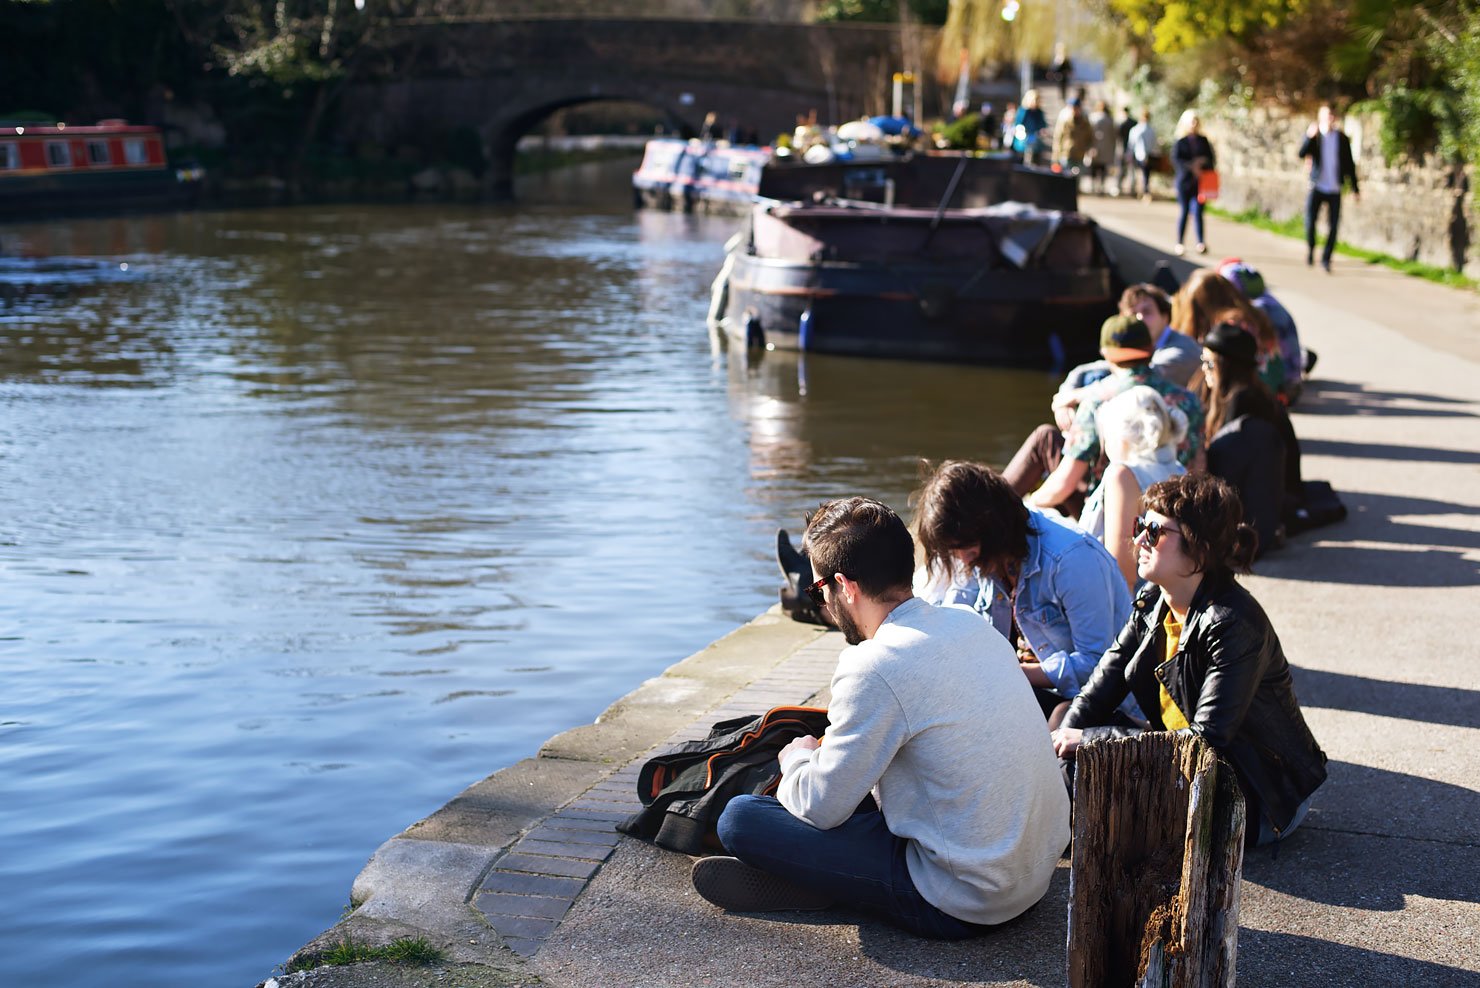 The best way to spend a sunny Saturday in London: Walking along Regent's Canal